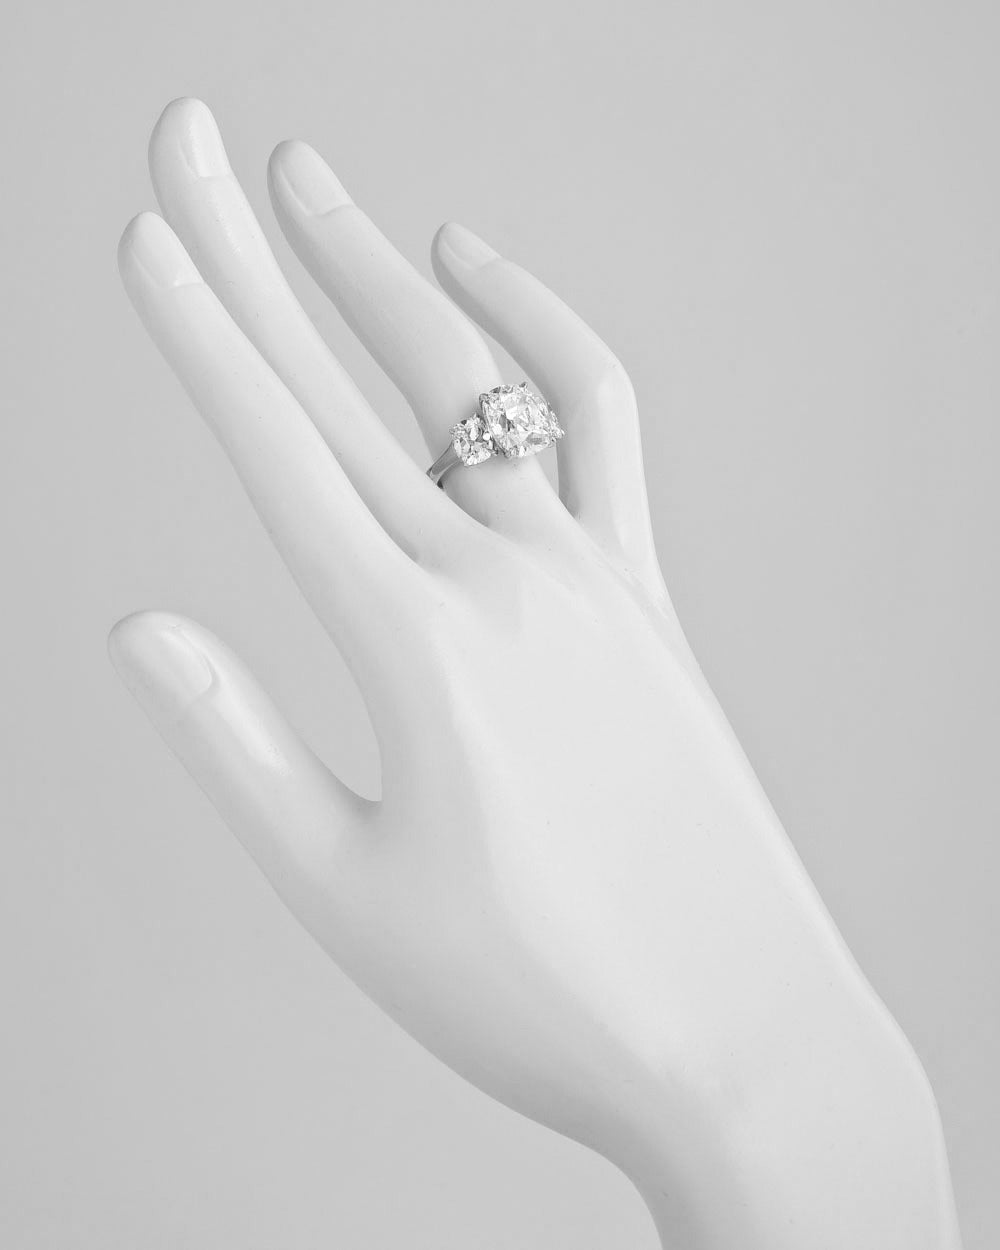 Diamond engagement ring, centering on a colorless cushion-cut diamond weighing 5.04 carats, with two cushion-cut diamond shoulders weighing approximately 1.97 total carats, mounted in platinum. Accompanied by the GIA certificate for the cushion-cut